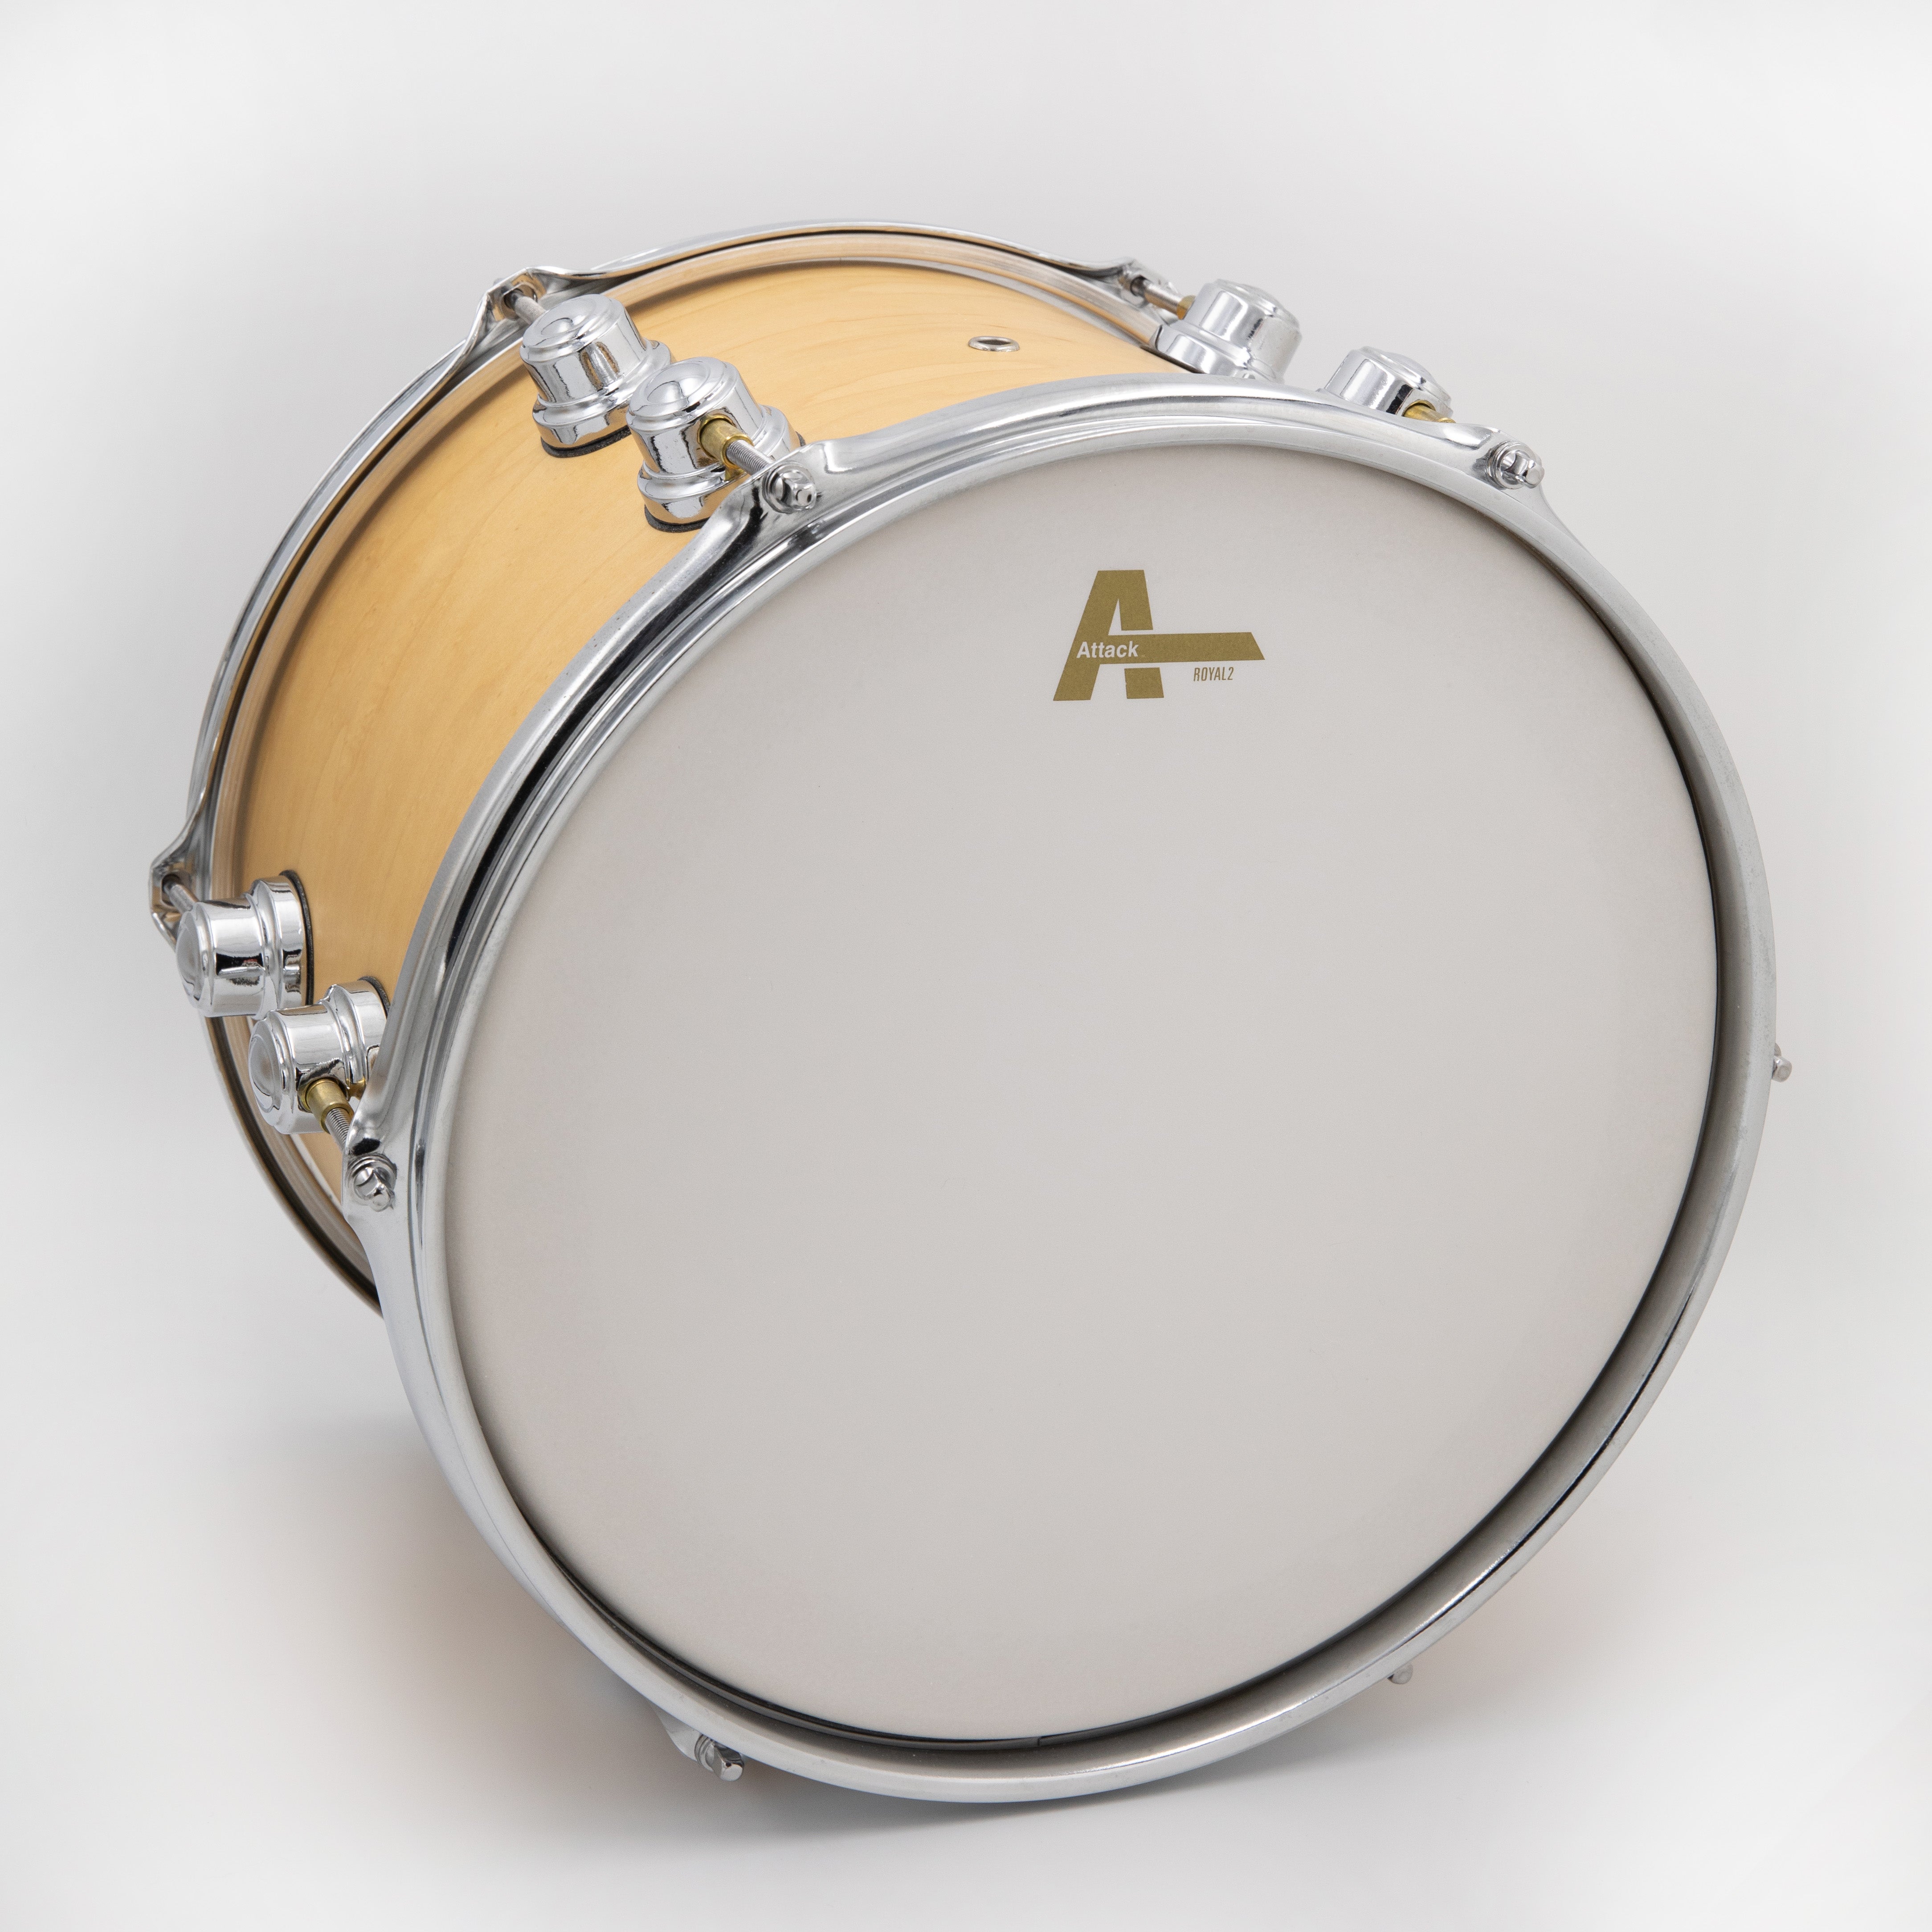 Attack Royal 1 8" 1 - Ply Medium S Film Drumhead - Coated